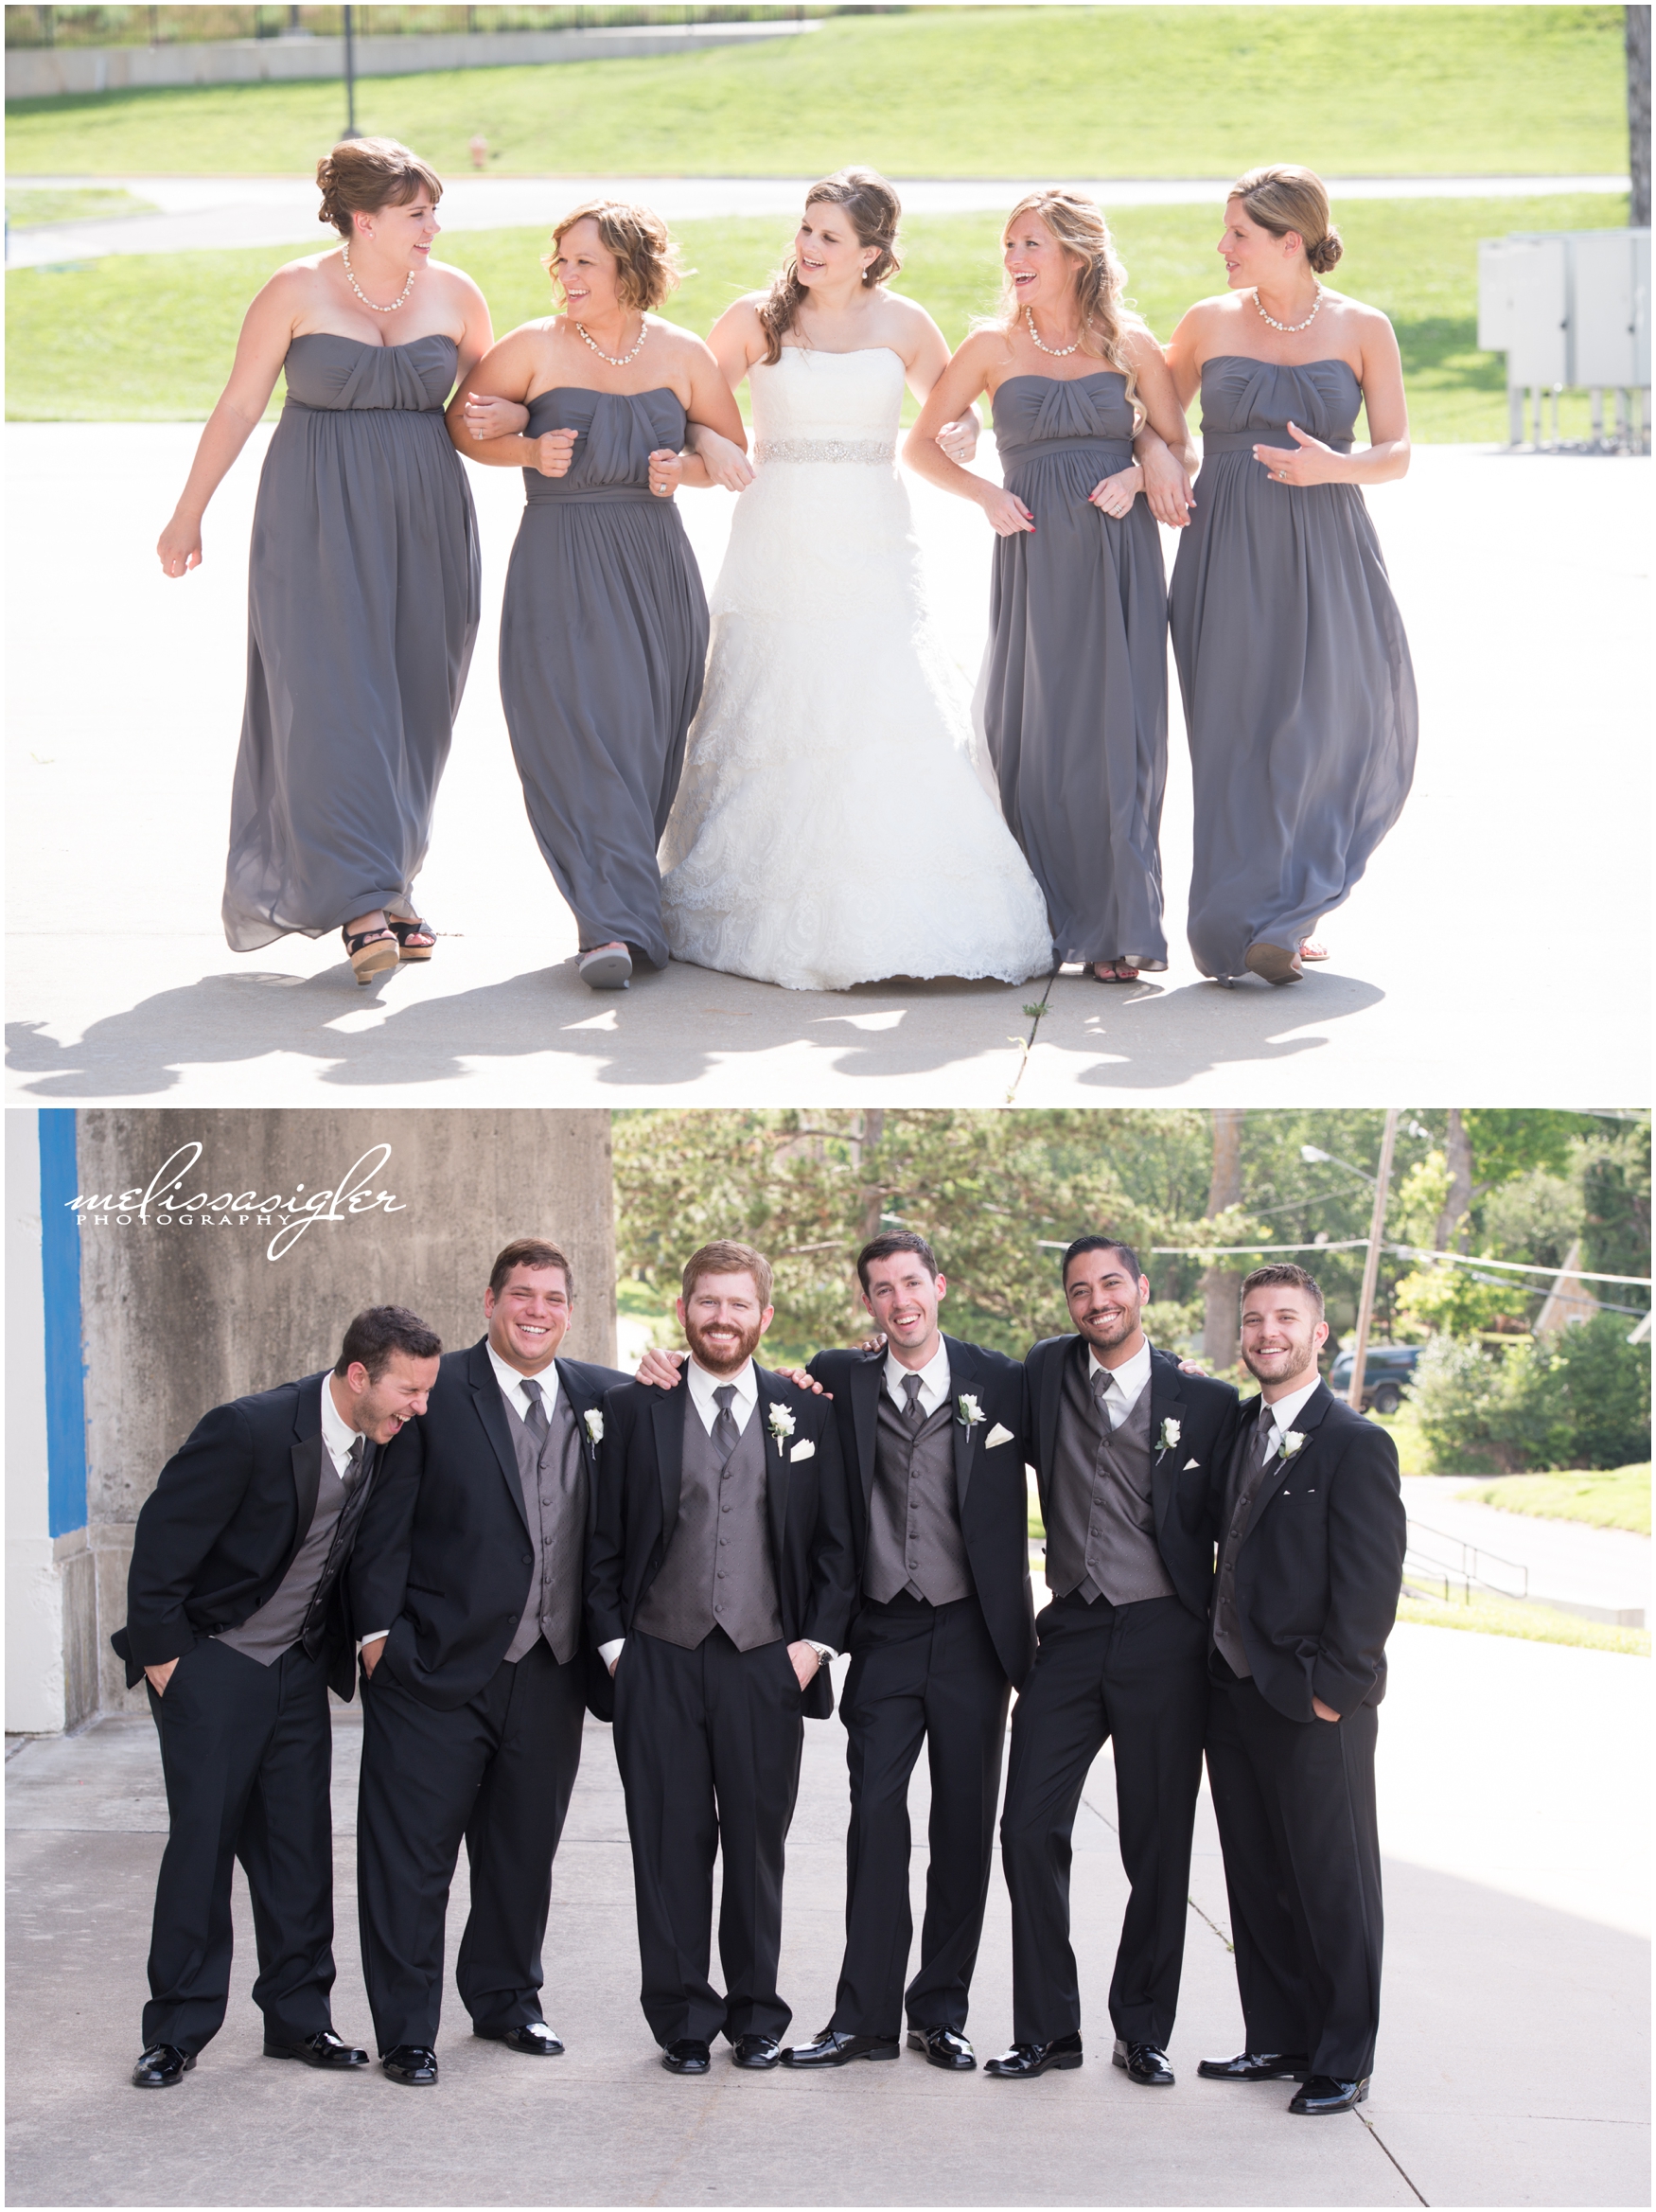 Wedding party at the University of Kansas by Melissa Sigler Photography